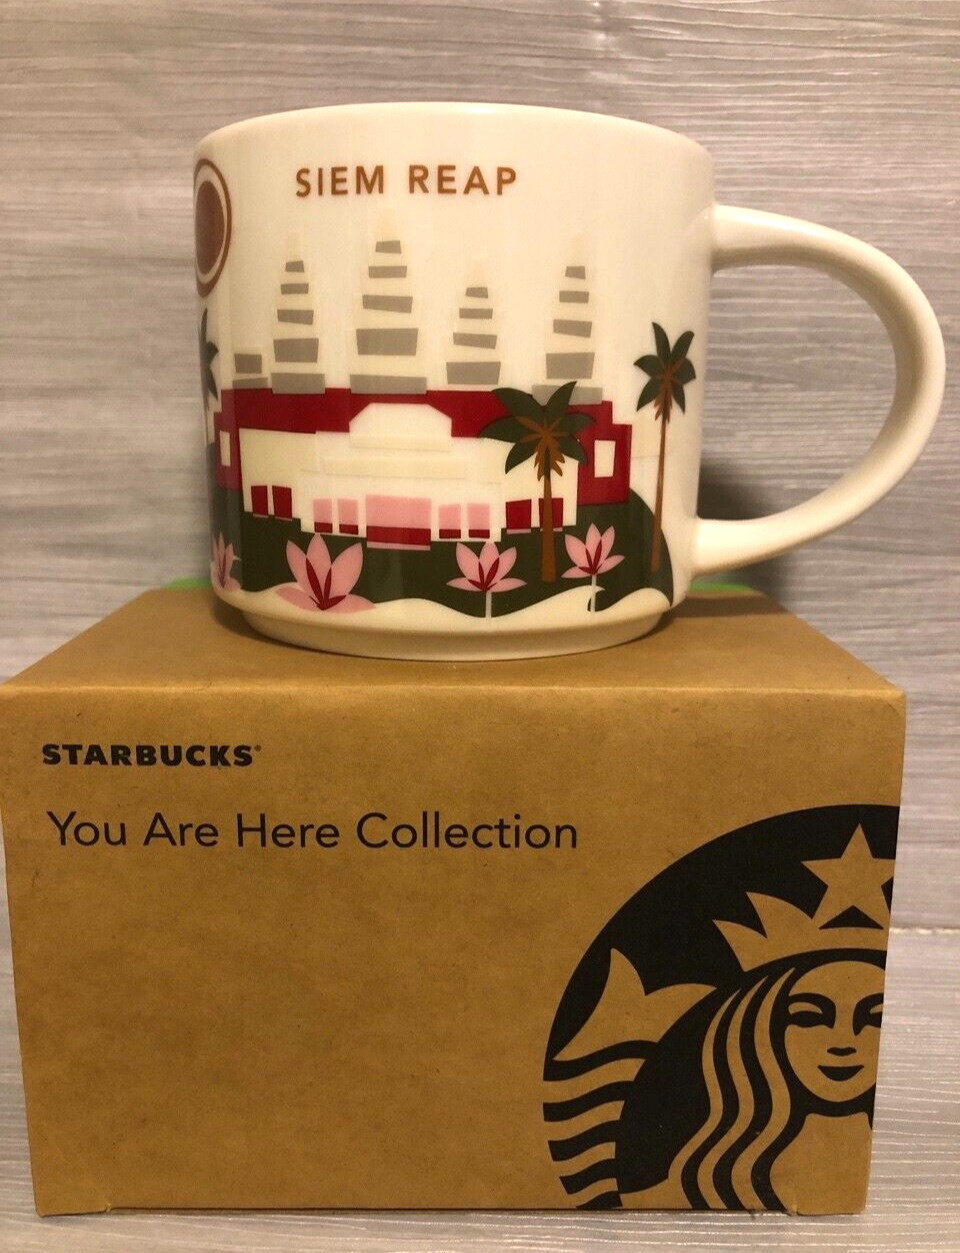 Siem reap Cambodia Starbucks coffee Cup Mug 14oz You Are Here Collection New